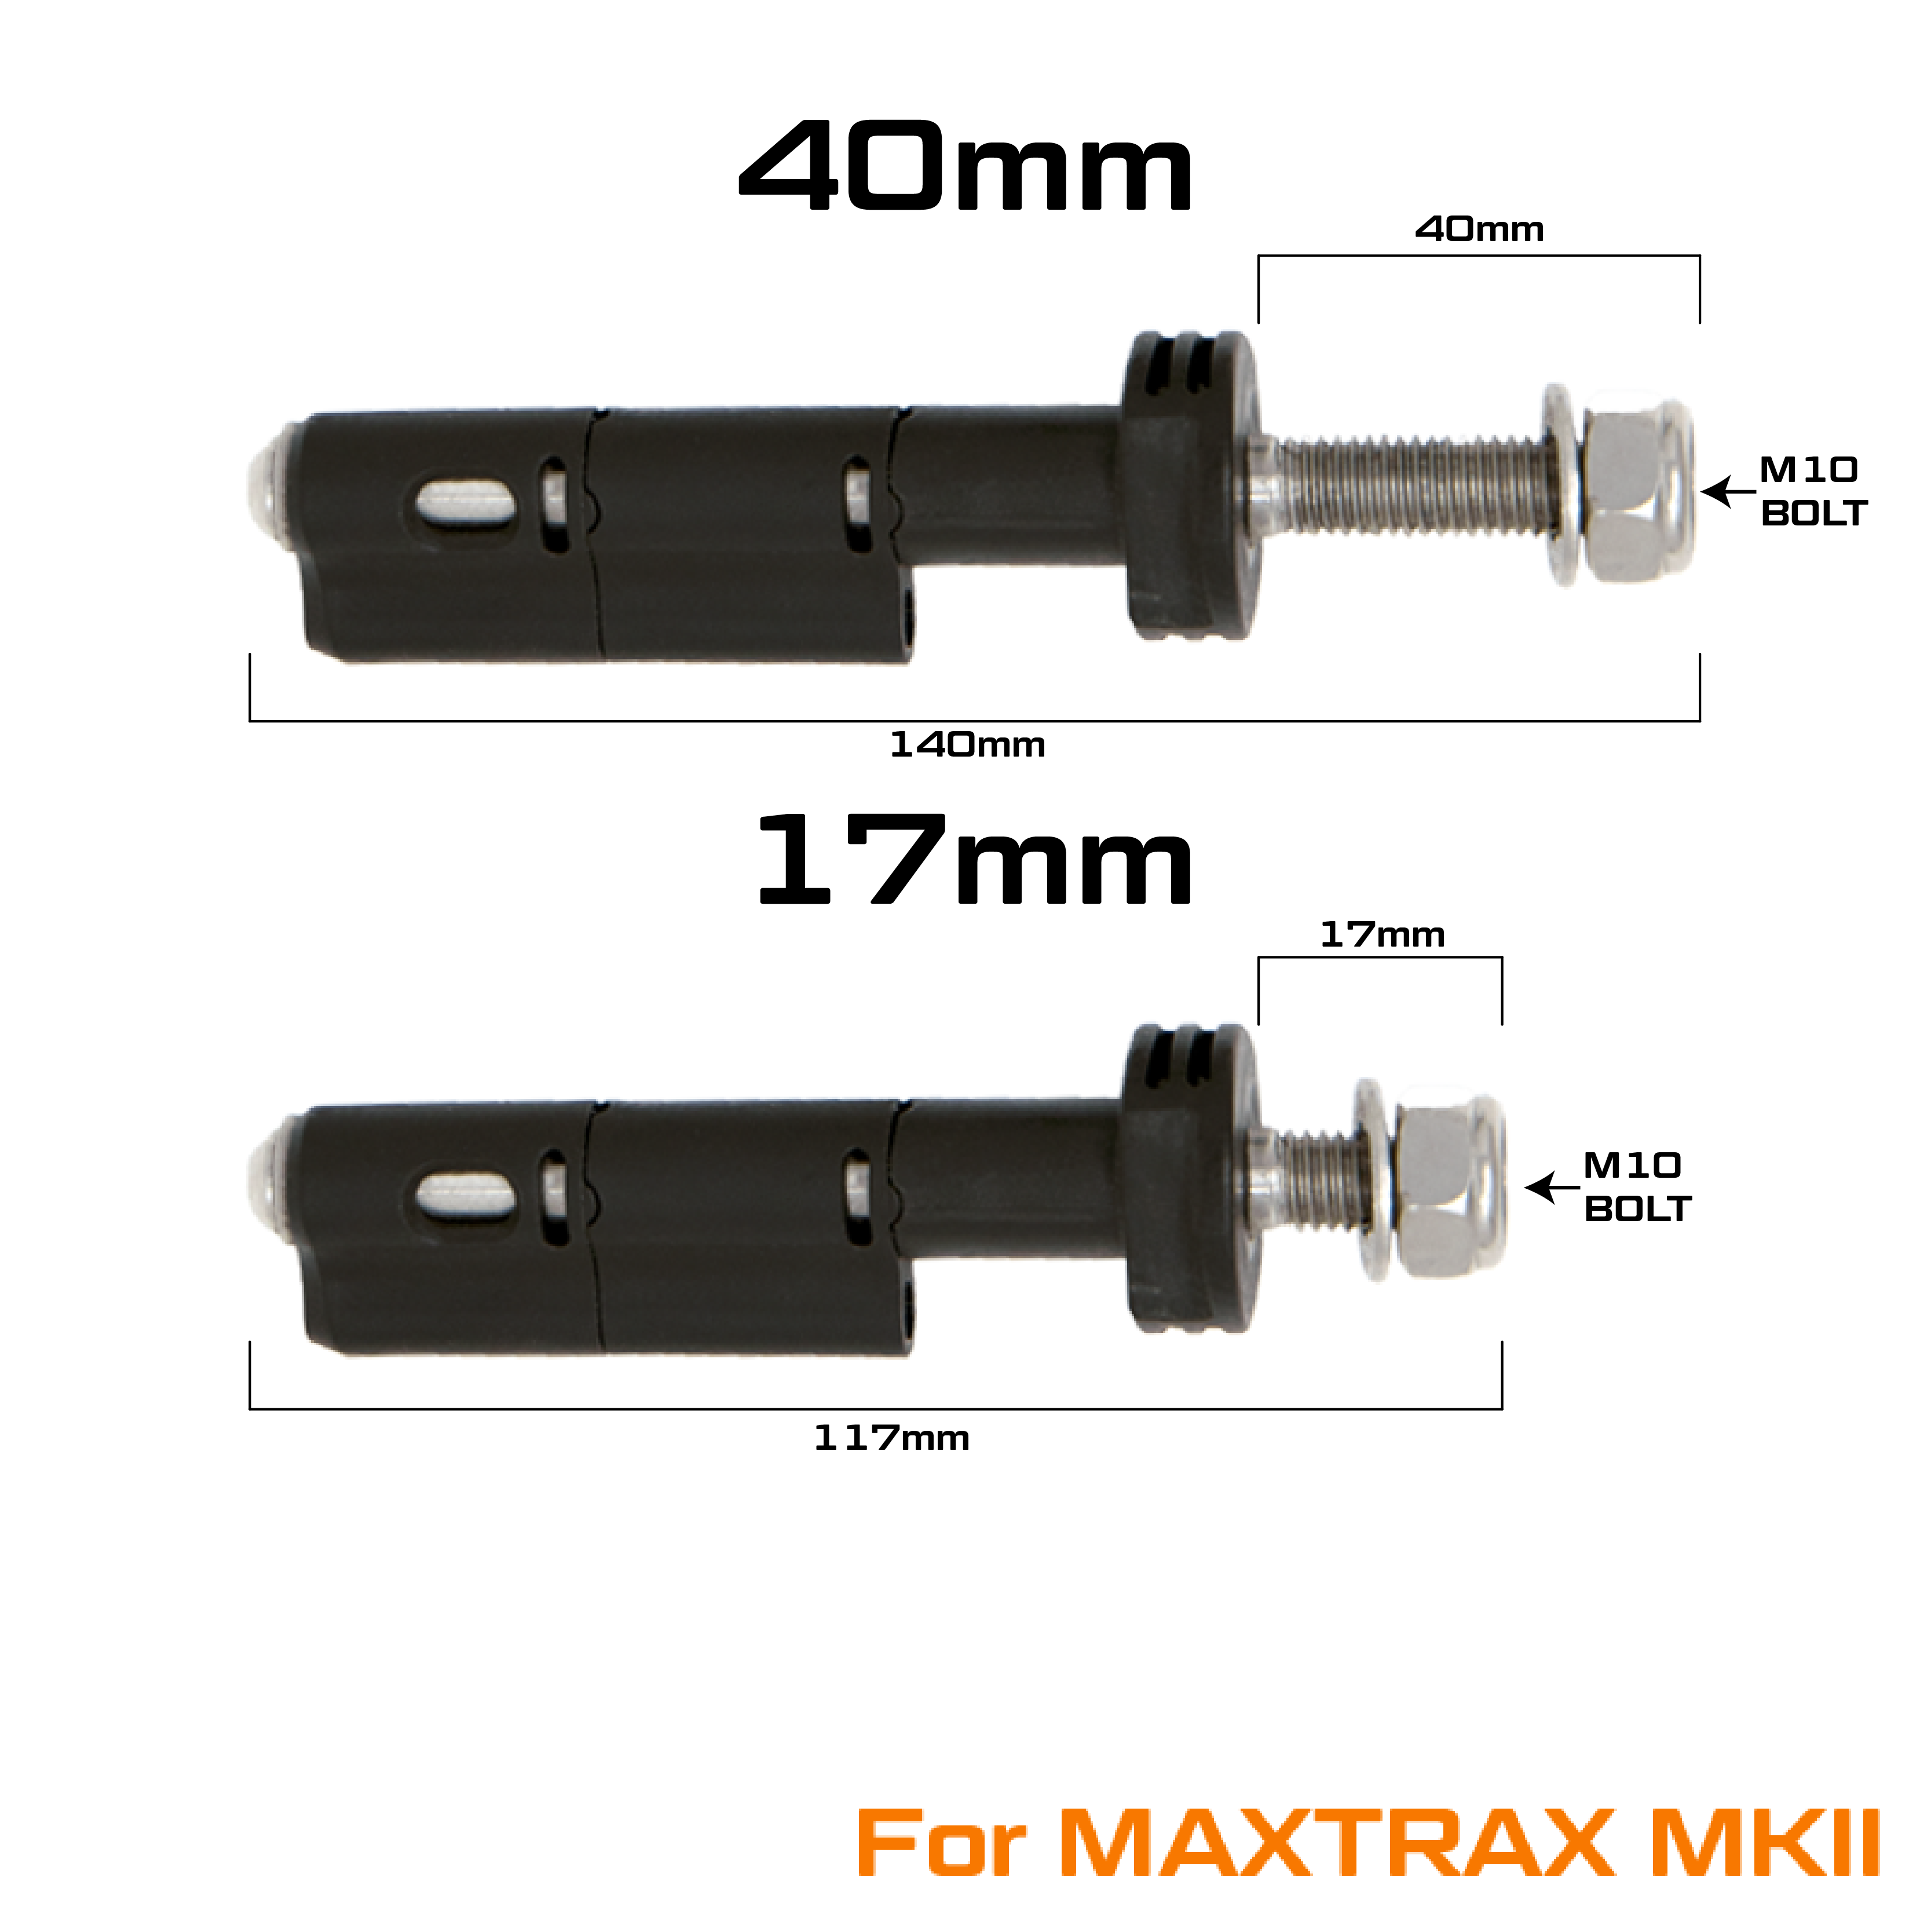 MAXTRAX MKII Mounting Pins (For MKII, LITE, or Mini)  Mounting Gear MAXTRAX- Overland Kitted